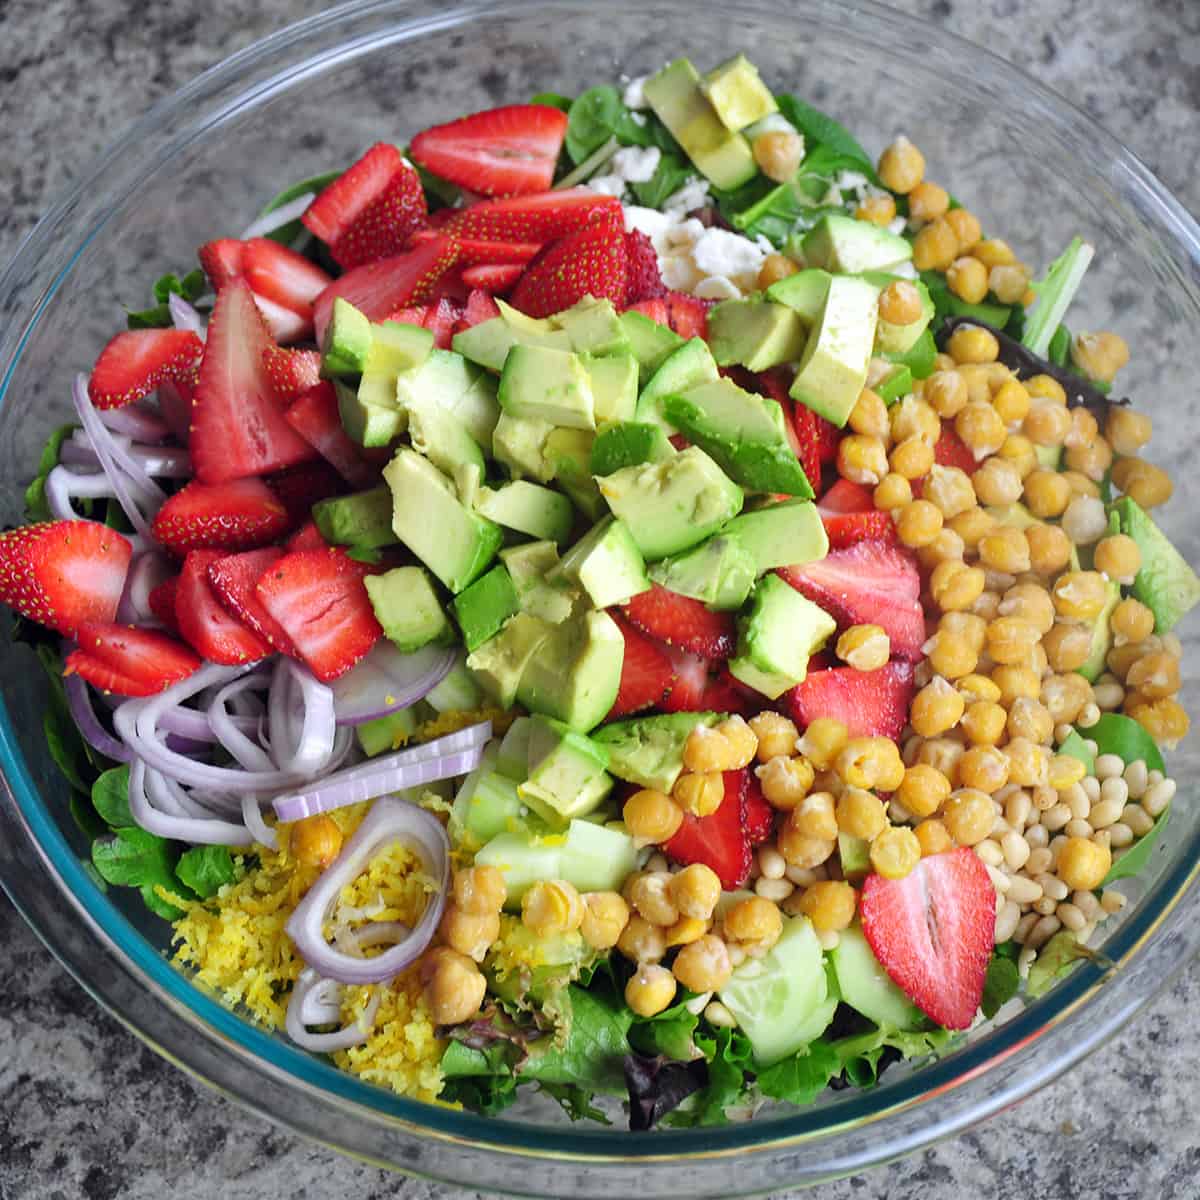 Colorful bowl of lettuce and salad ingredients.